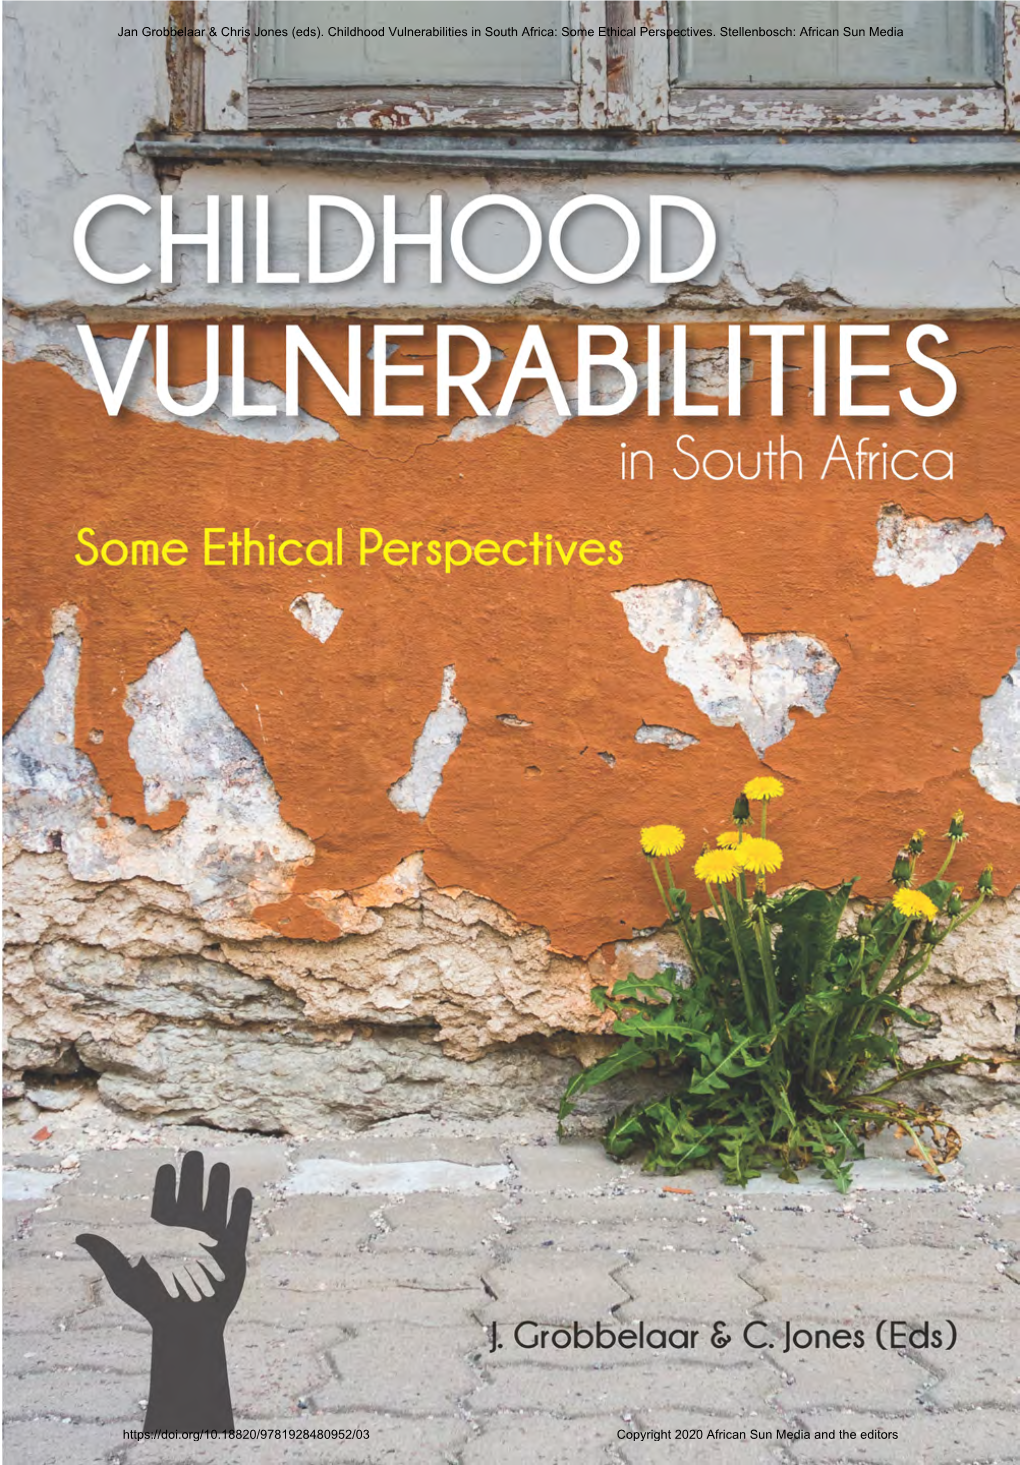 Childhood Vulnerabilities in South Africa: Some Ethical Perspectives